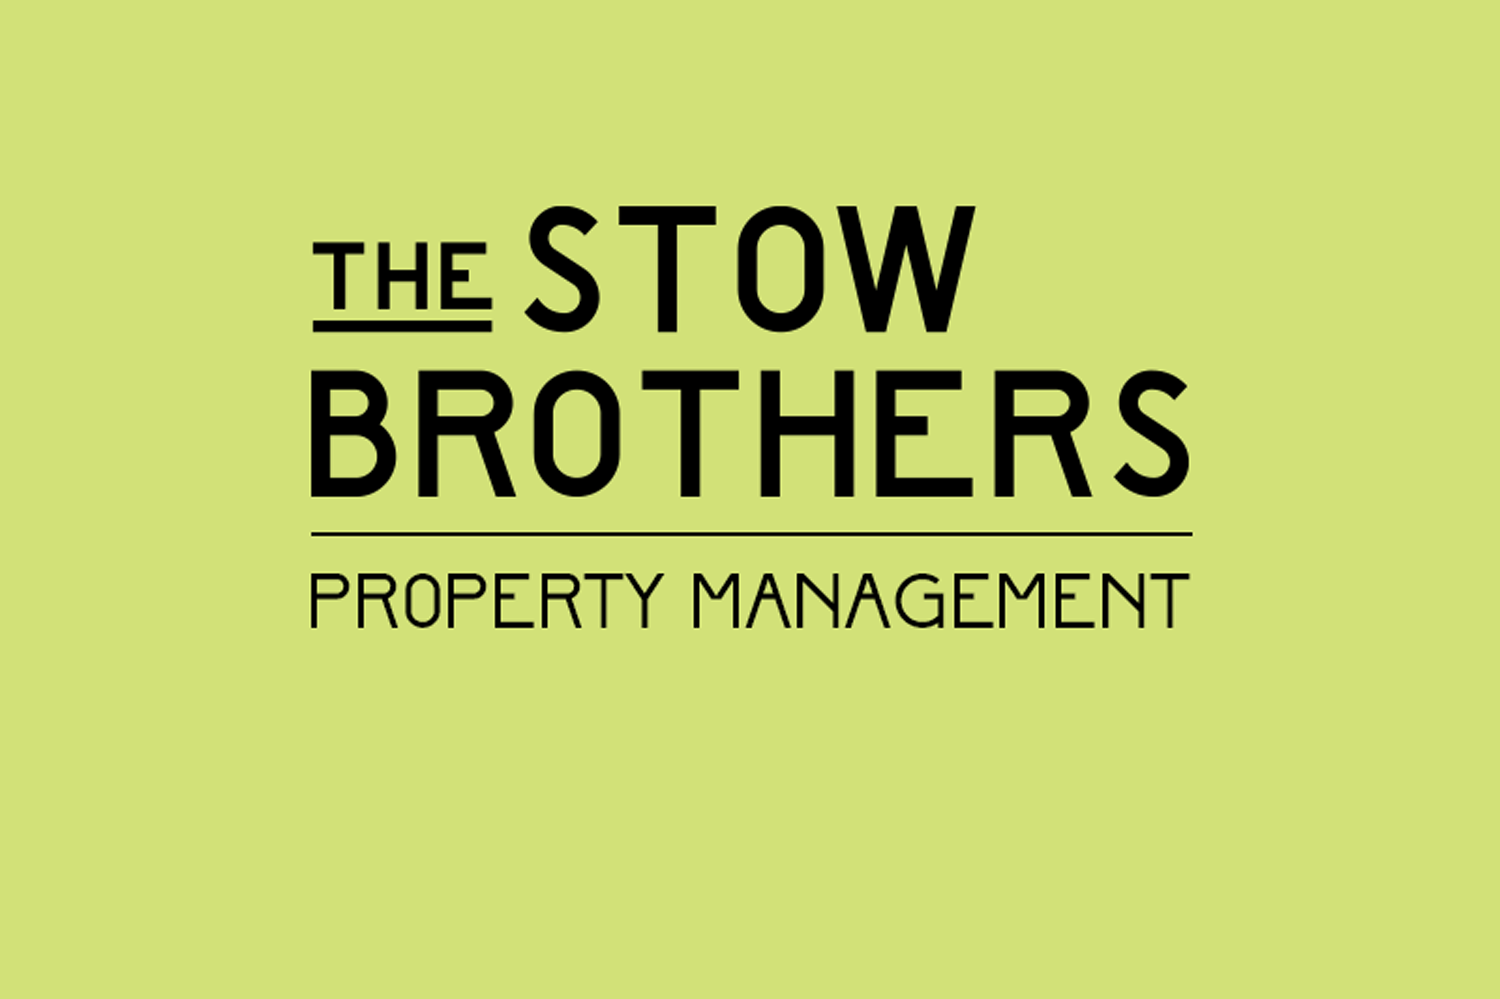 the stow brothers